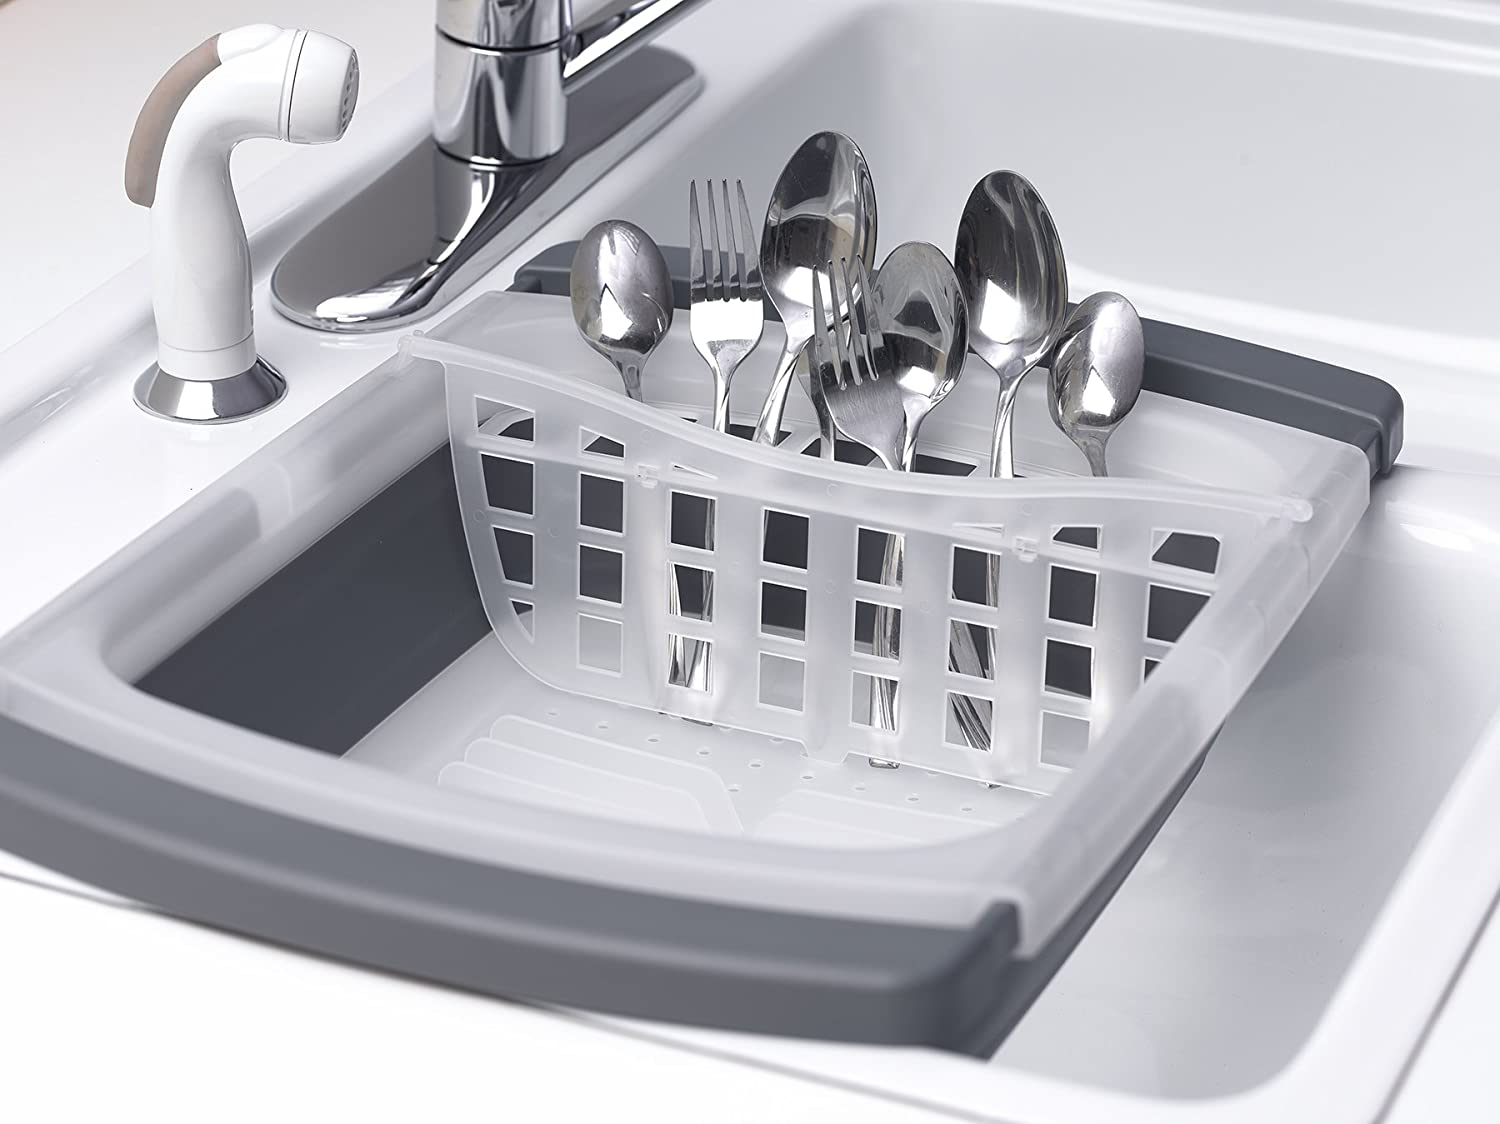 Collapsible Over-The-Sink Dish Drainer